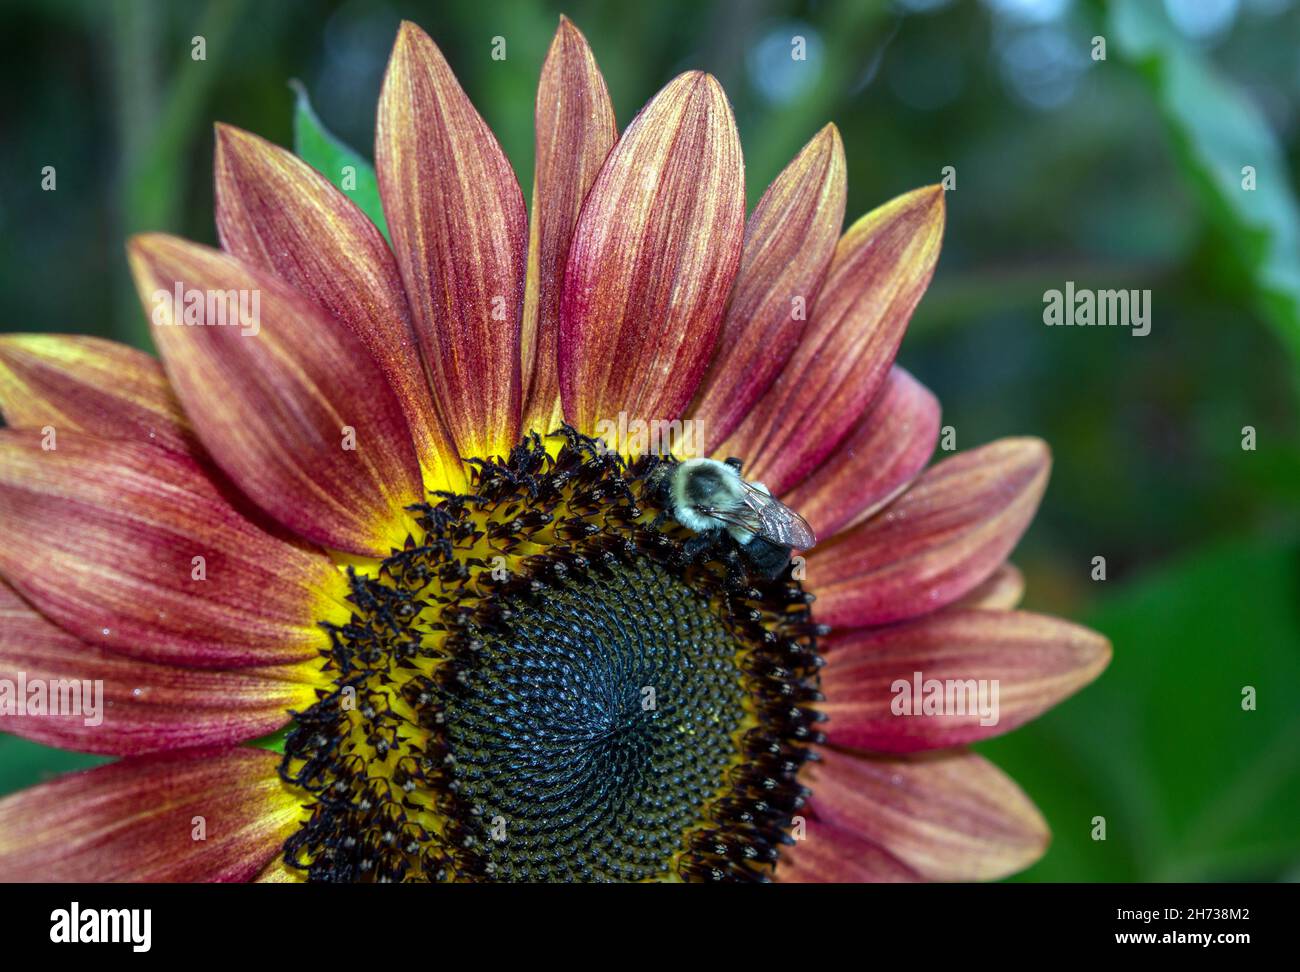 Bees and flowers makes a beautiful photo and portrays a summer time setting in Missouri. Bokeh effect. Stock Photo